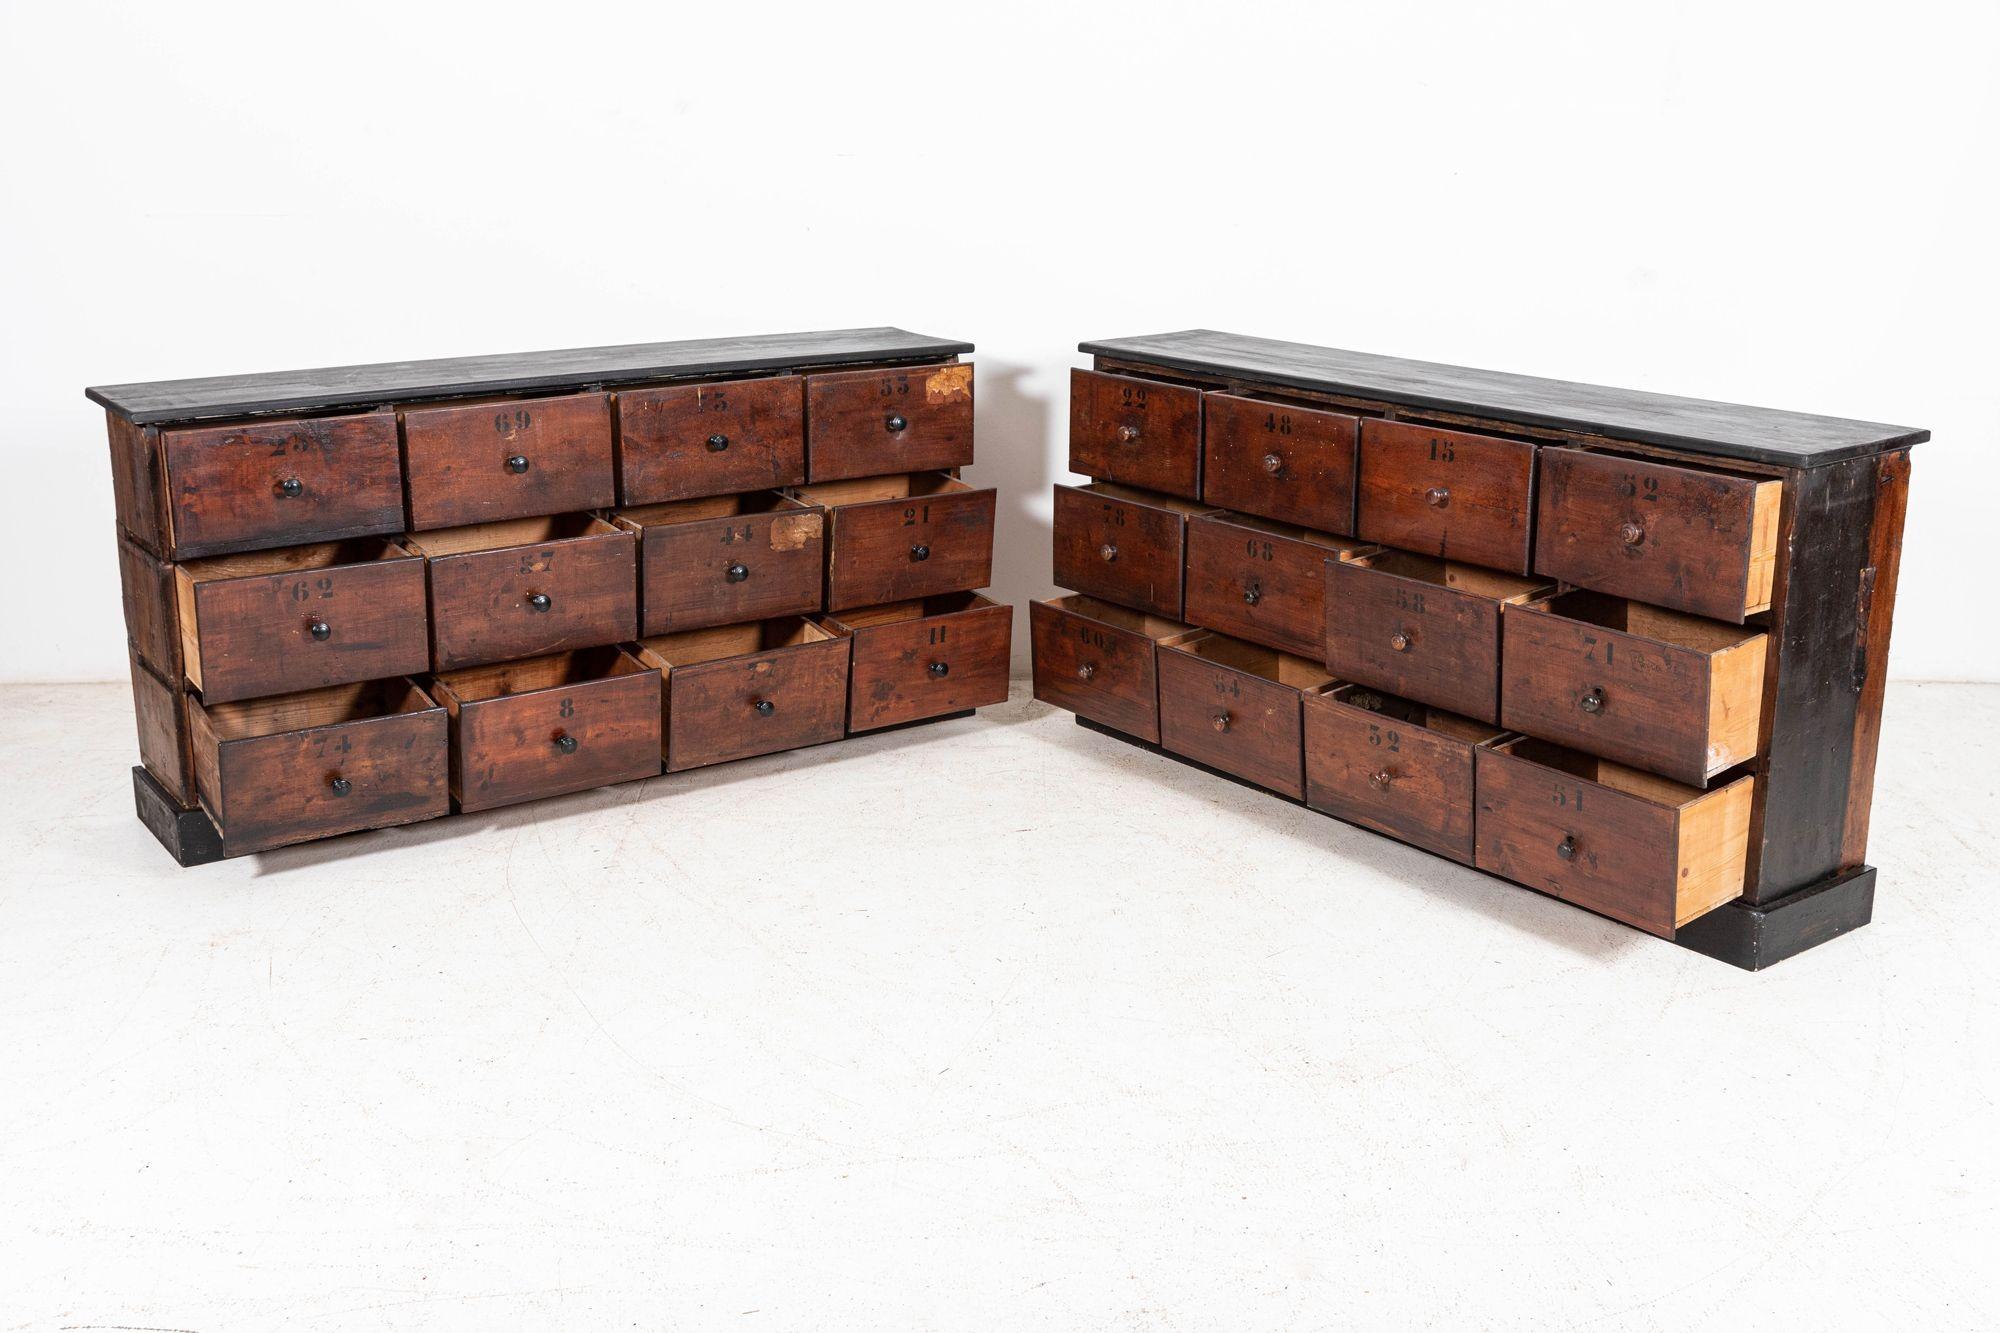 Circa 1880
 
19thC French Printers Drawers with original hand painted numbers. Pine & Fruitwood.
 
Sourced from the South of France
 
Price is each x1 left
 
sku 962
 
W166 x D34 x H81 cm